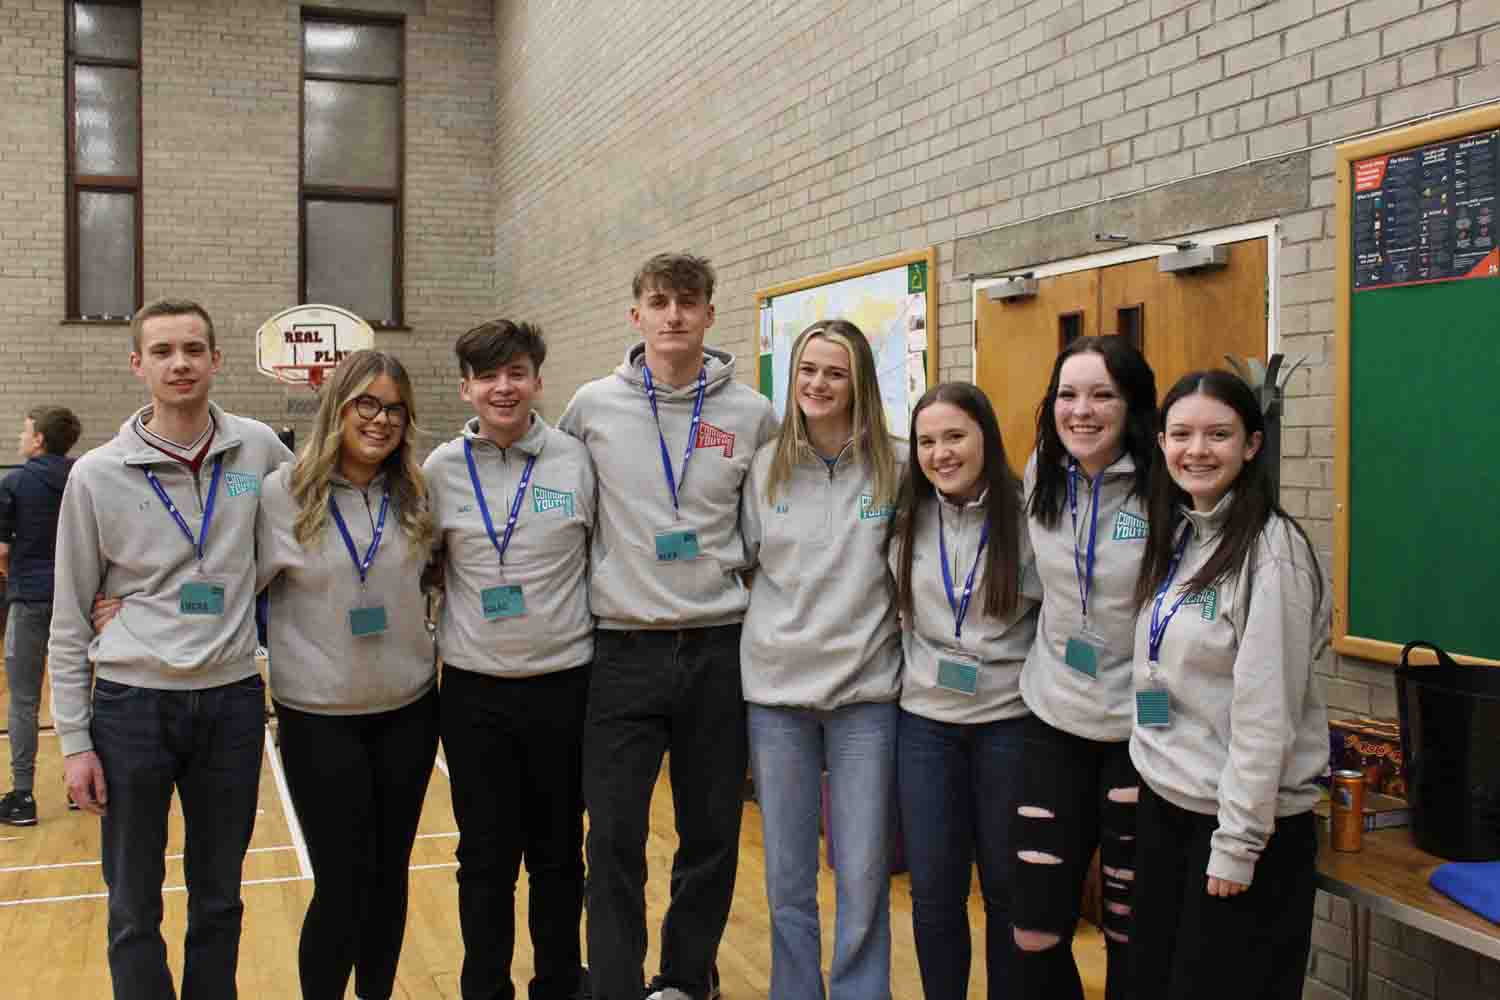 Members of Connor Youth Forum who planned and ran the ‘Destination' event.